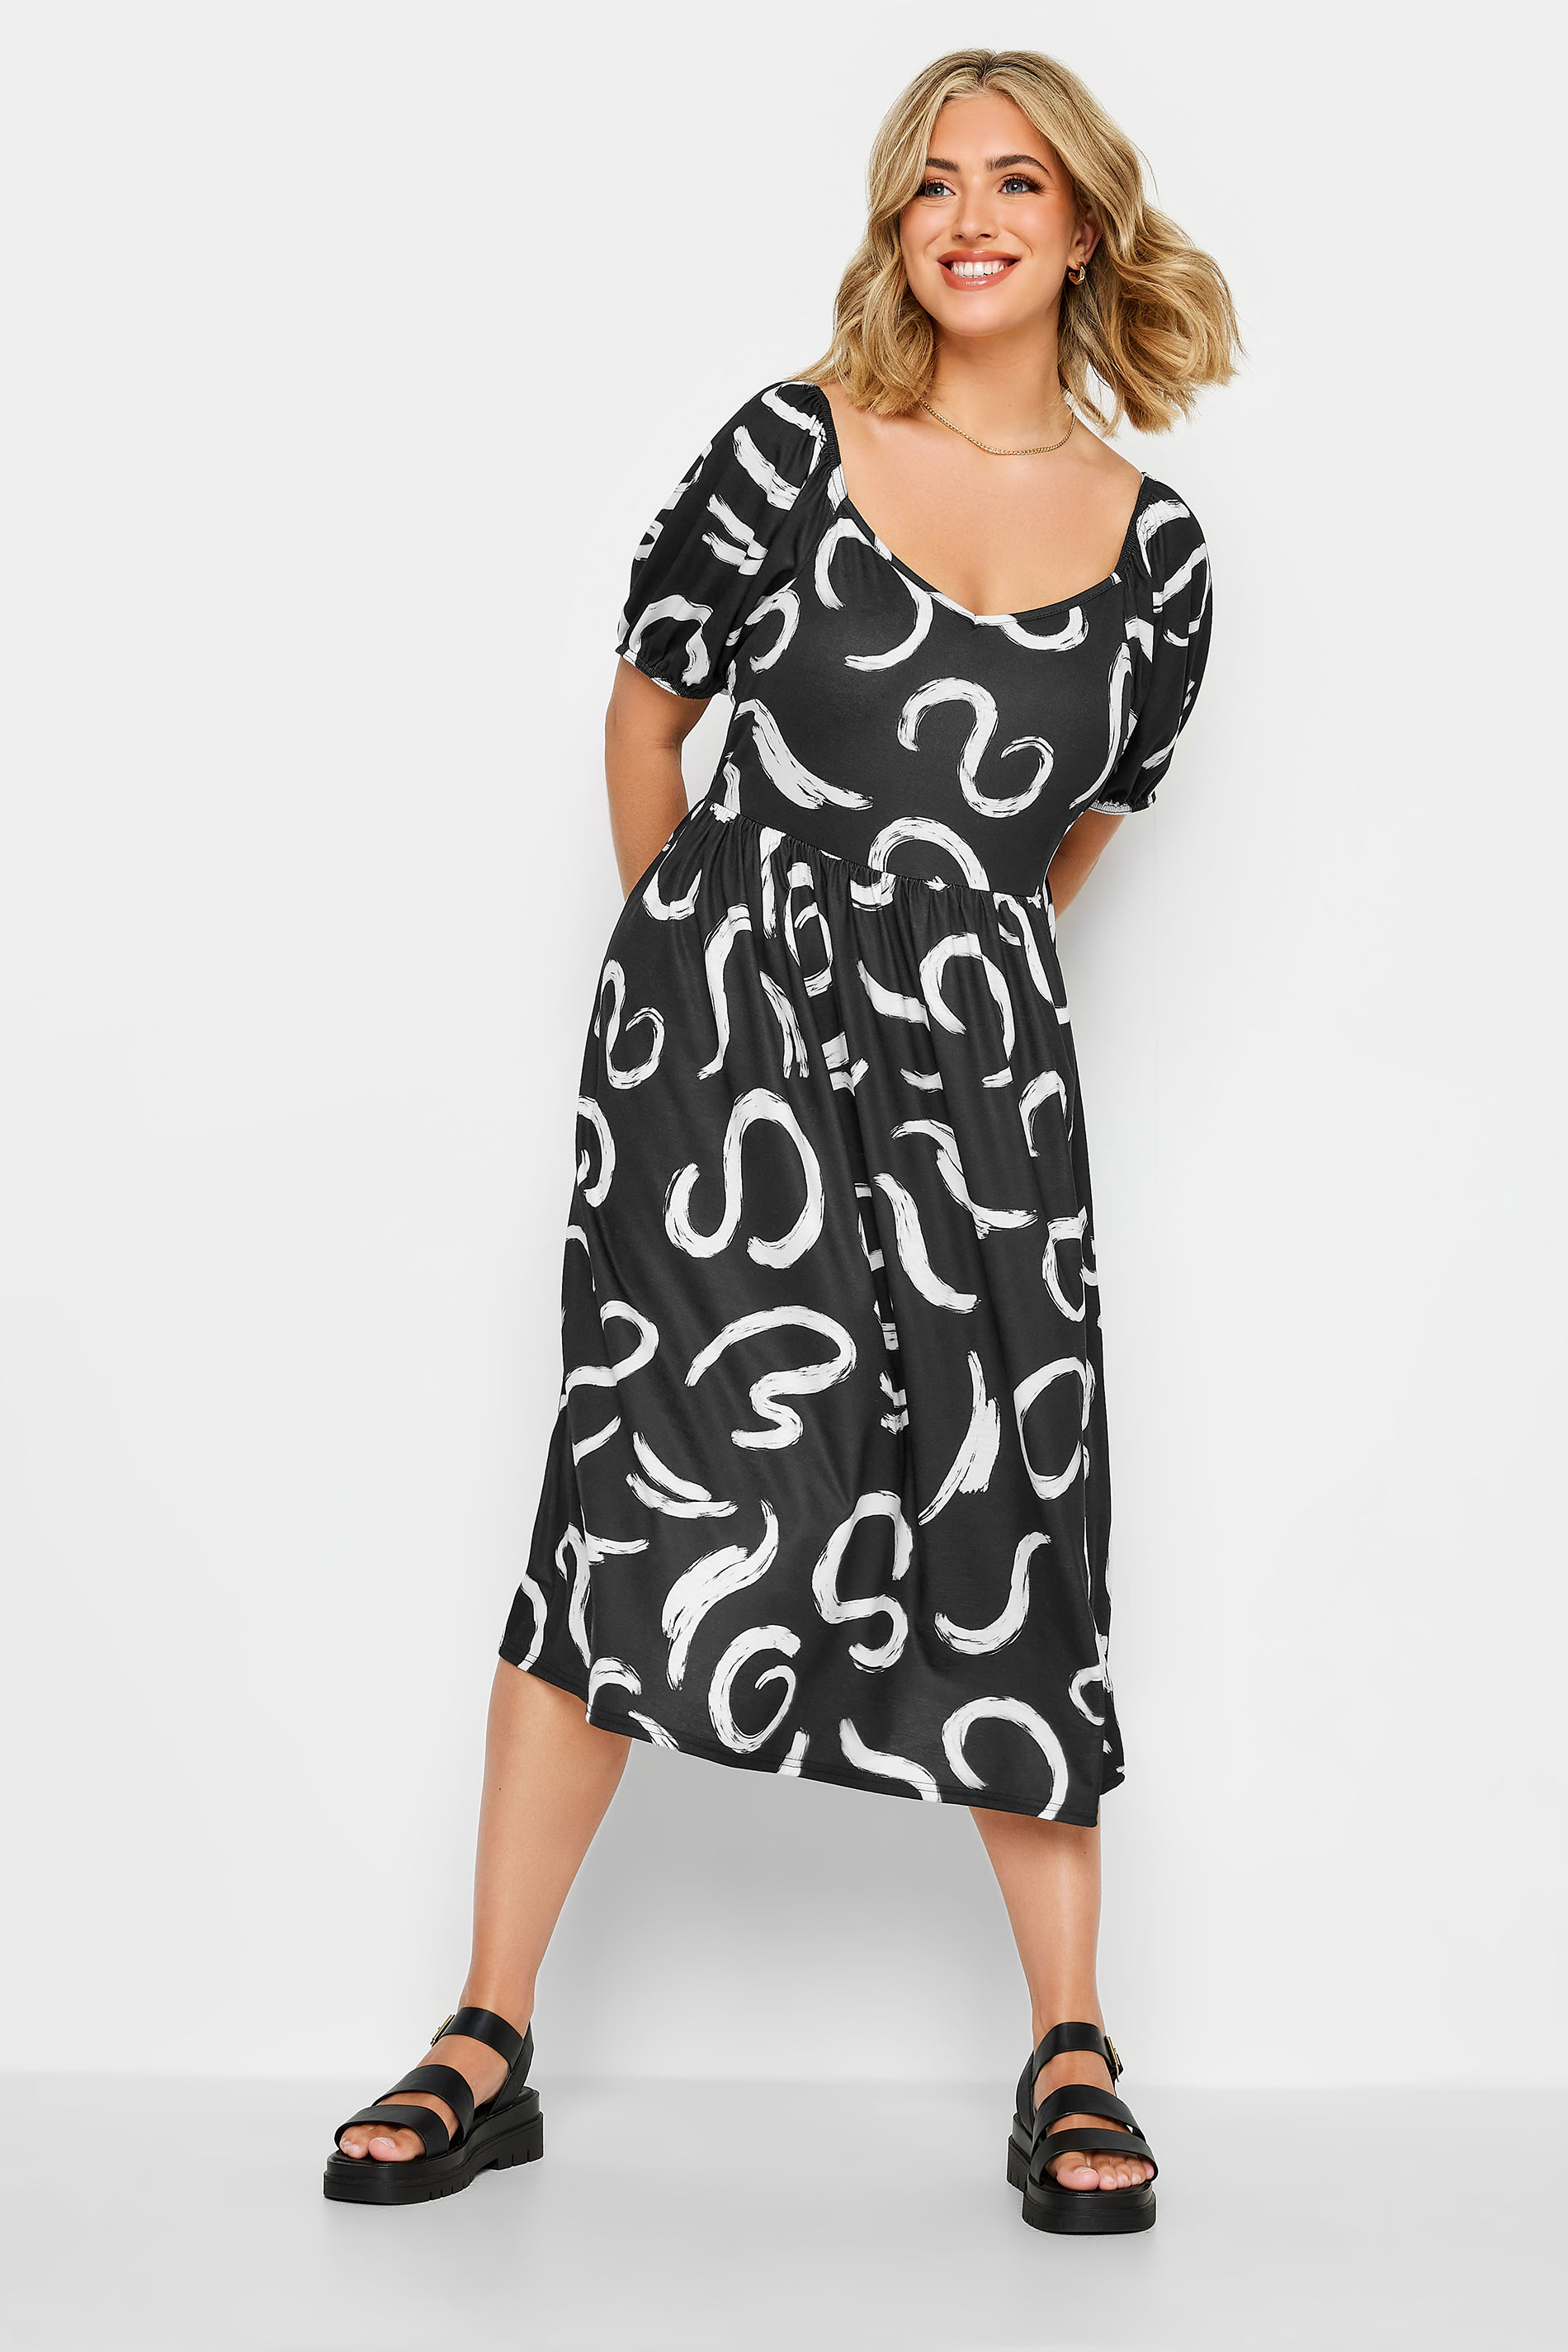 LIMITED COLLECTION Plus Size Black Swirl Print Midaxi Dress | Yours Clothing  2